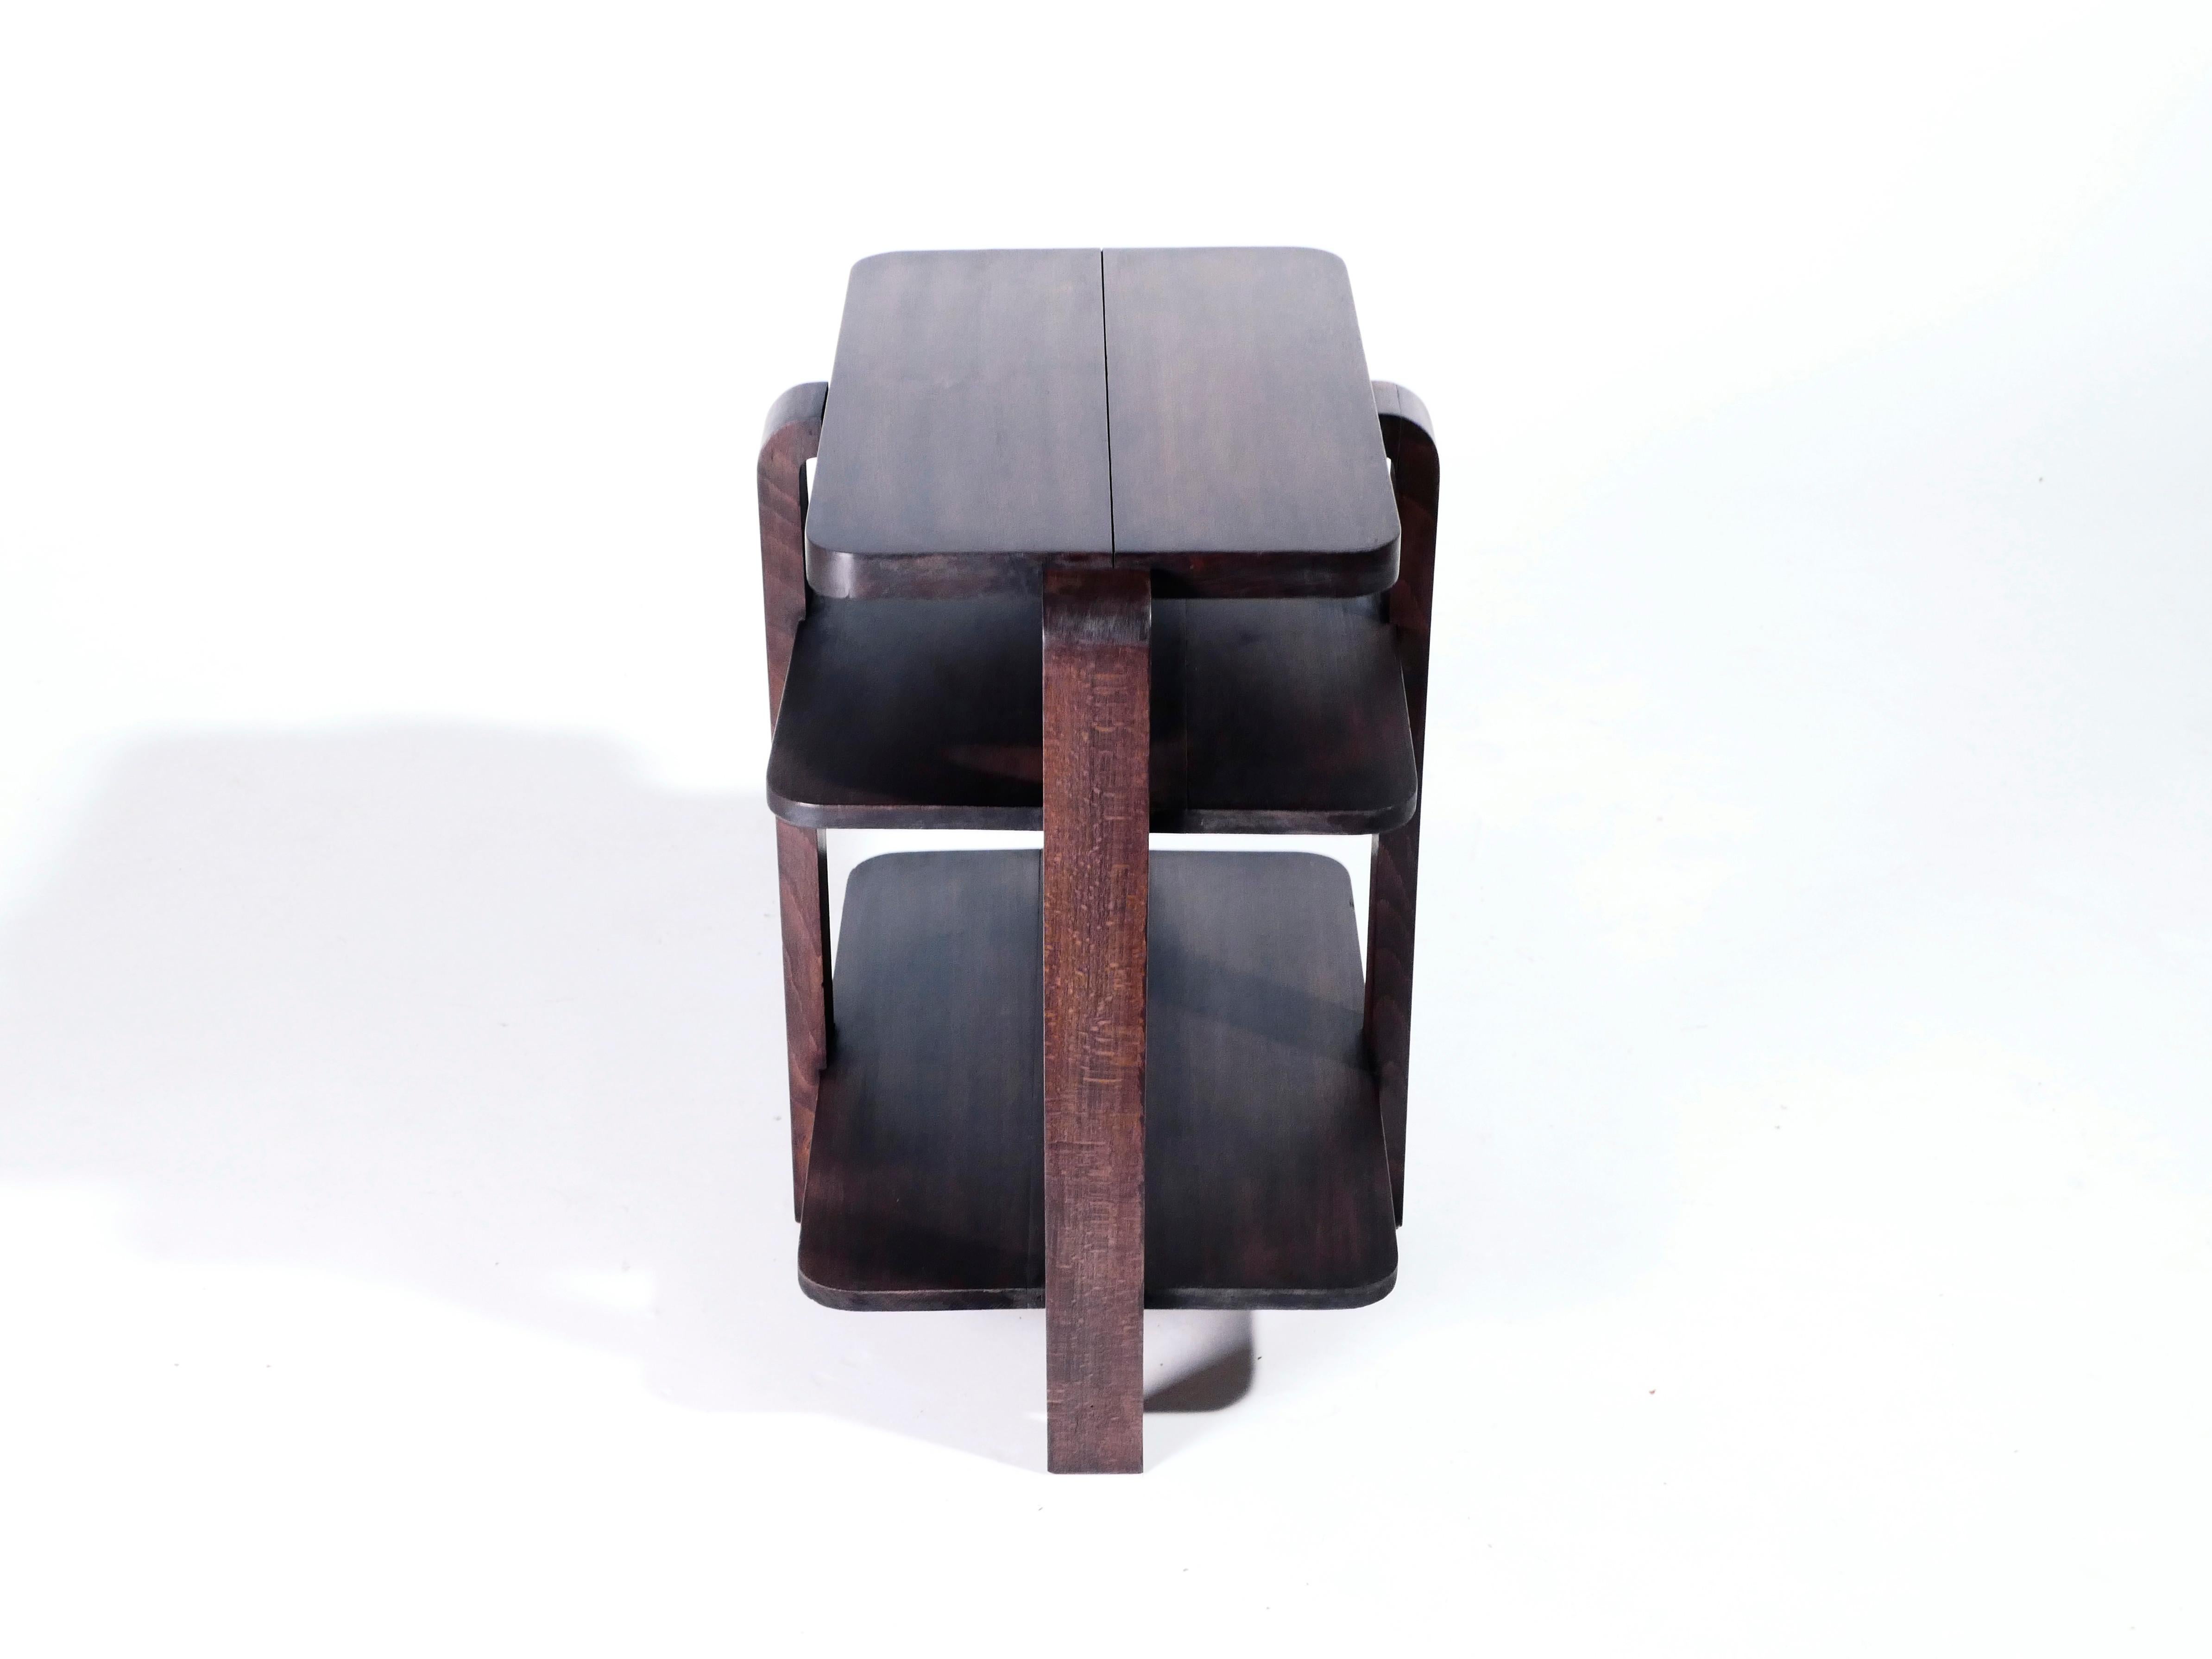 French Art Deco Modernist Mahogany Side Table, 1940s 3